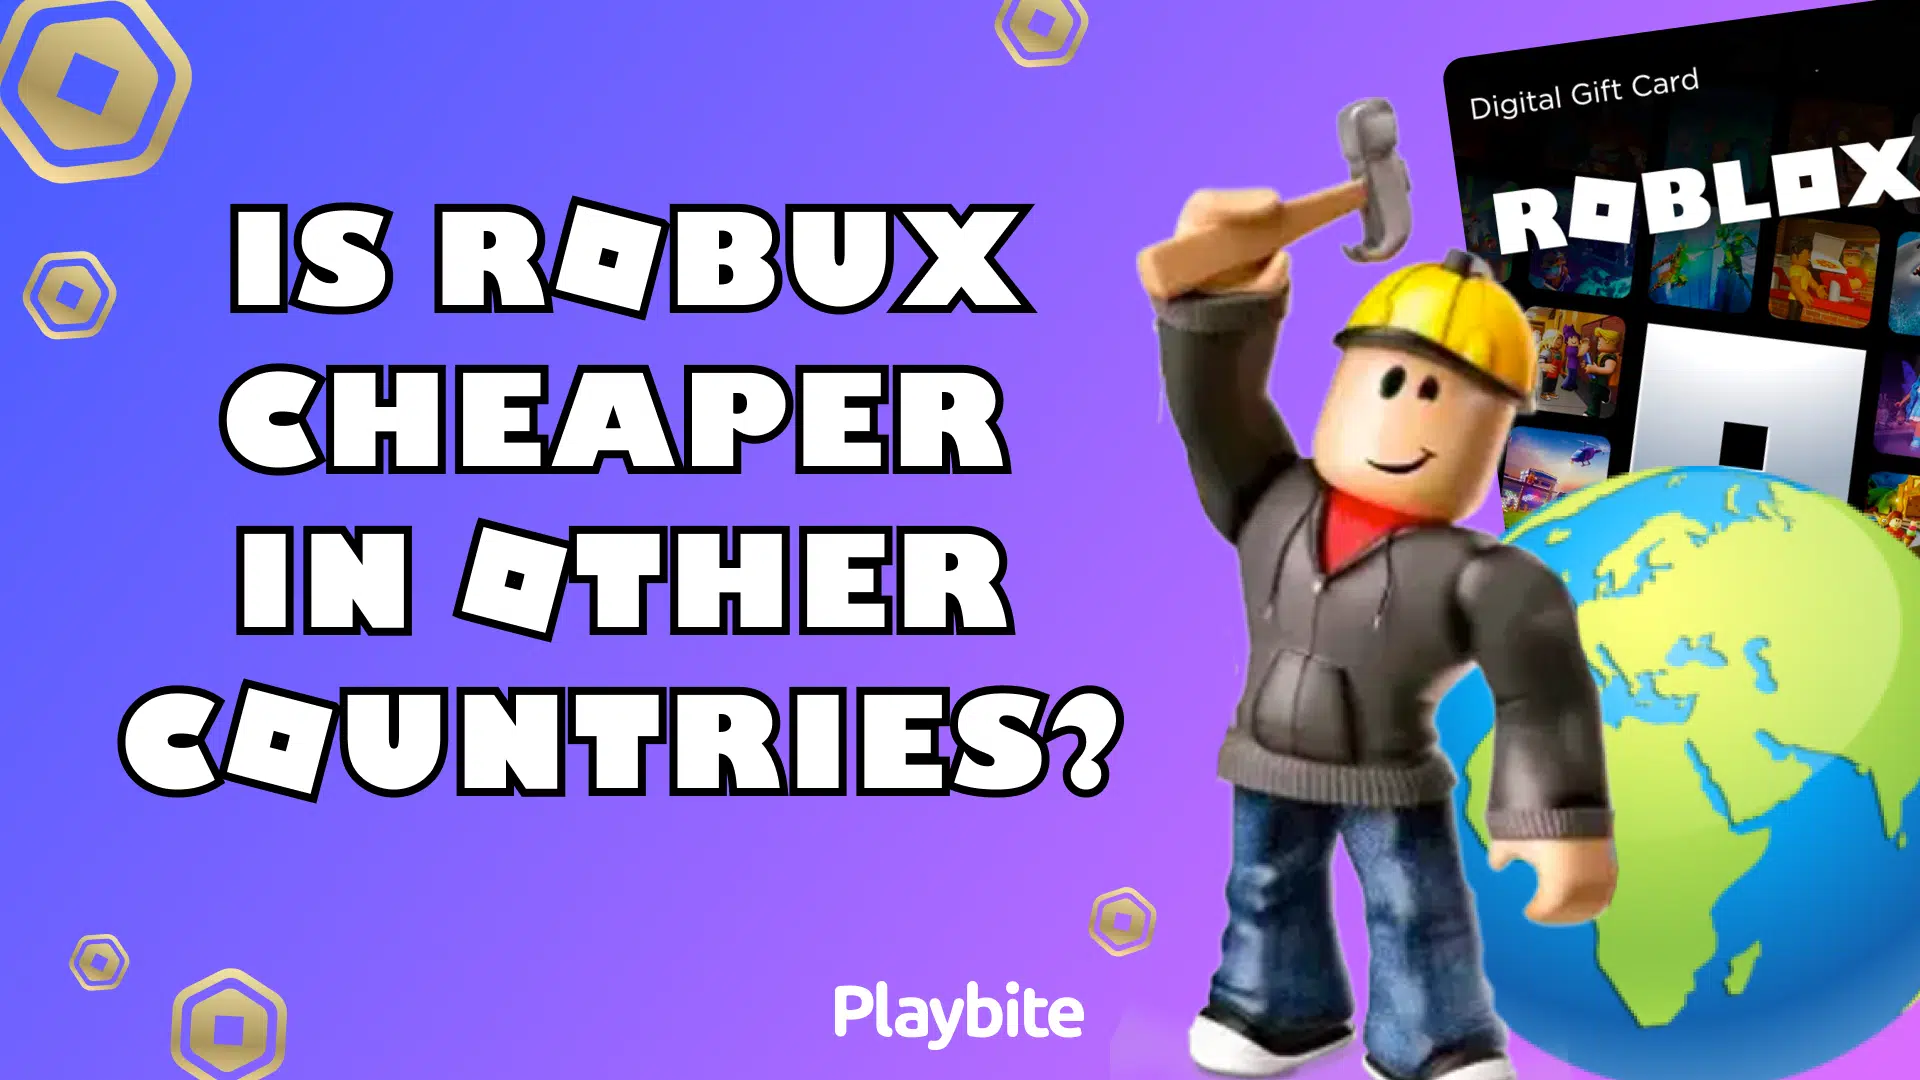 How To Buy Roblox Gift Cards for Cheaper (2023) 